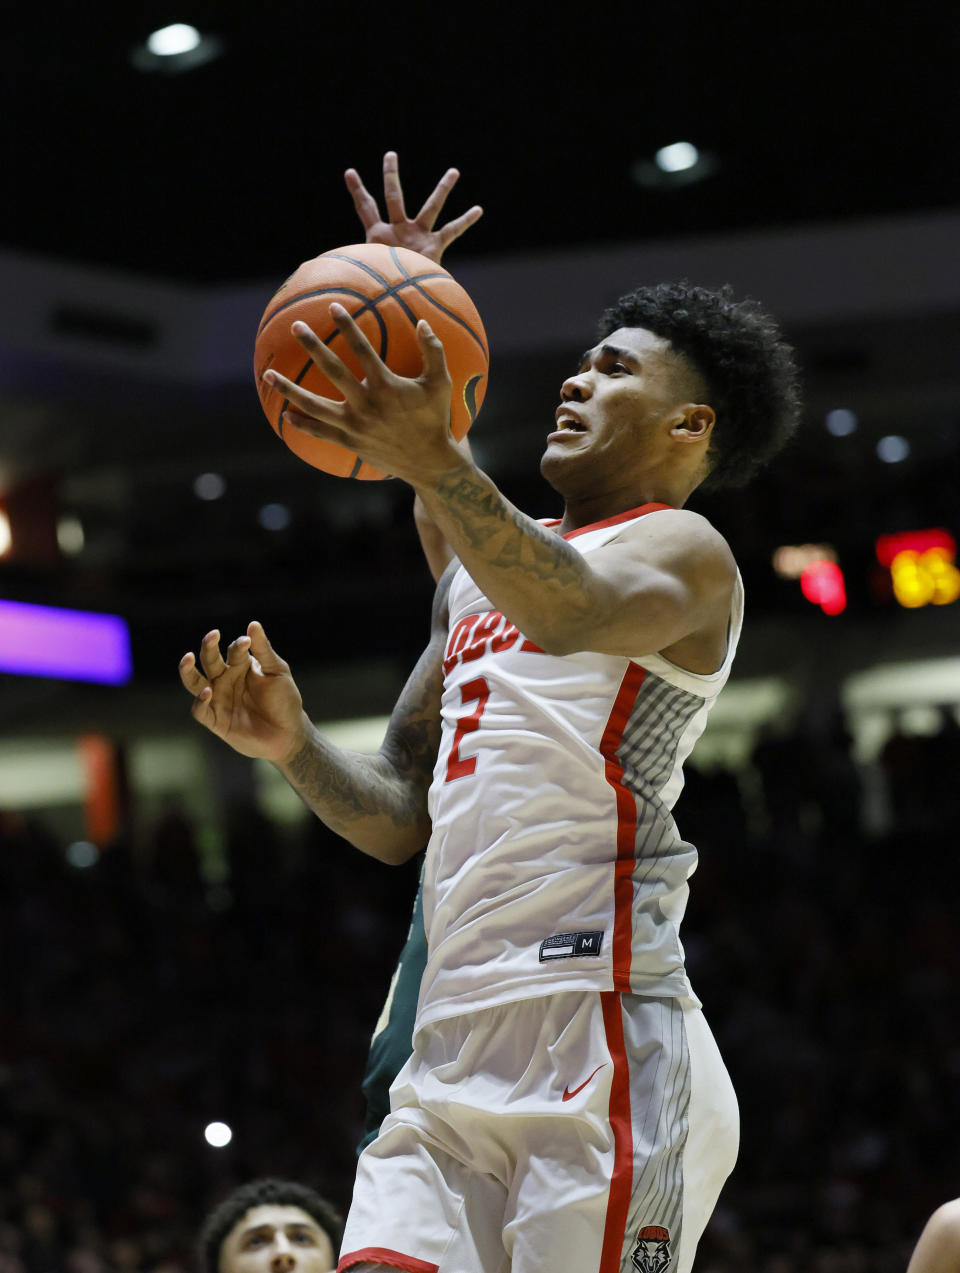 New Mexico guard Donovan Dent drives to the basket for the game-winning basket with seconds remaining against Colorado State in an NCAA college basketball game Wednesday, Feb. 21, 2024, in Albuquerque, N.M. (AP Photo/Eric Draper)